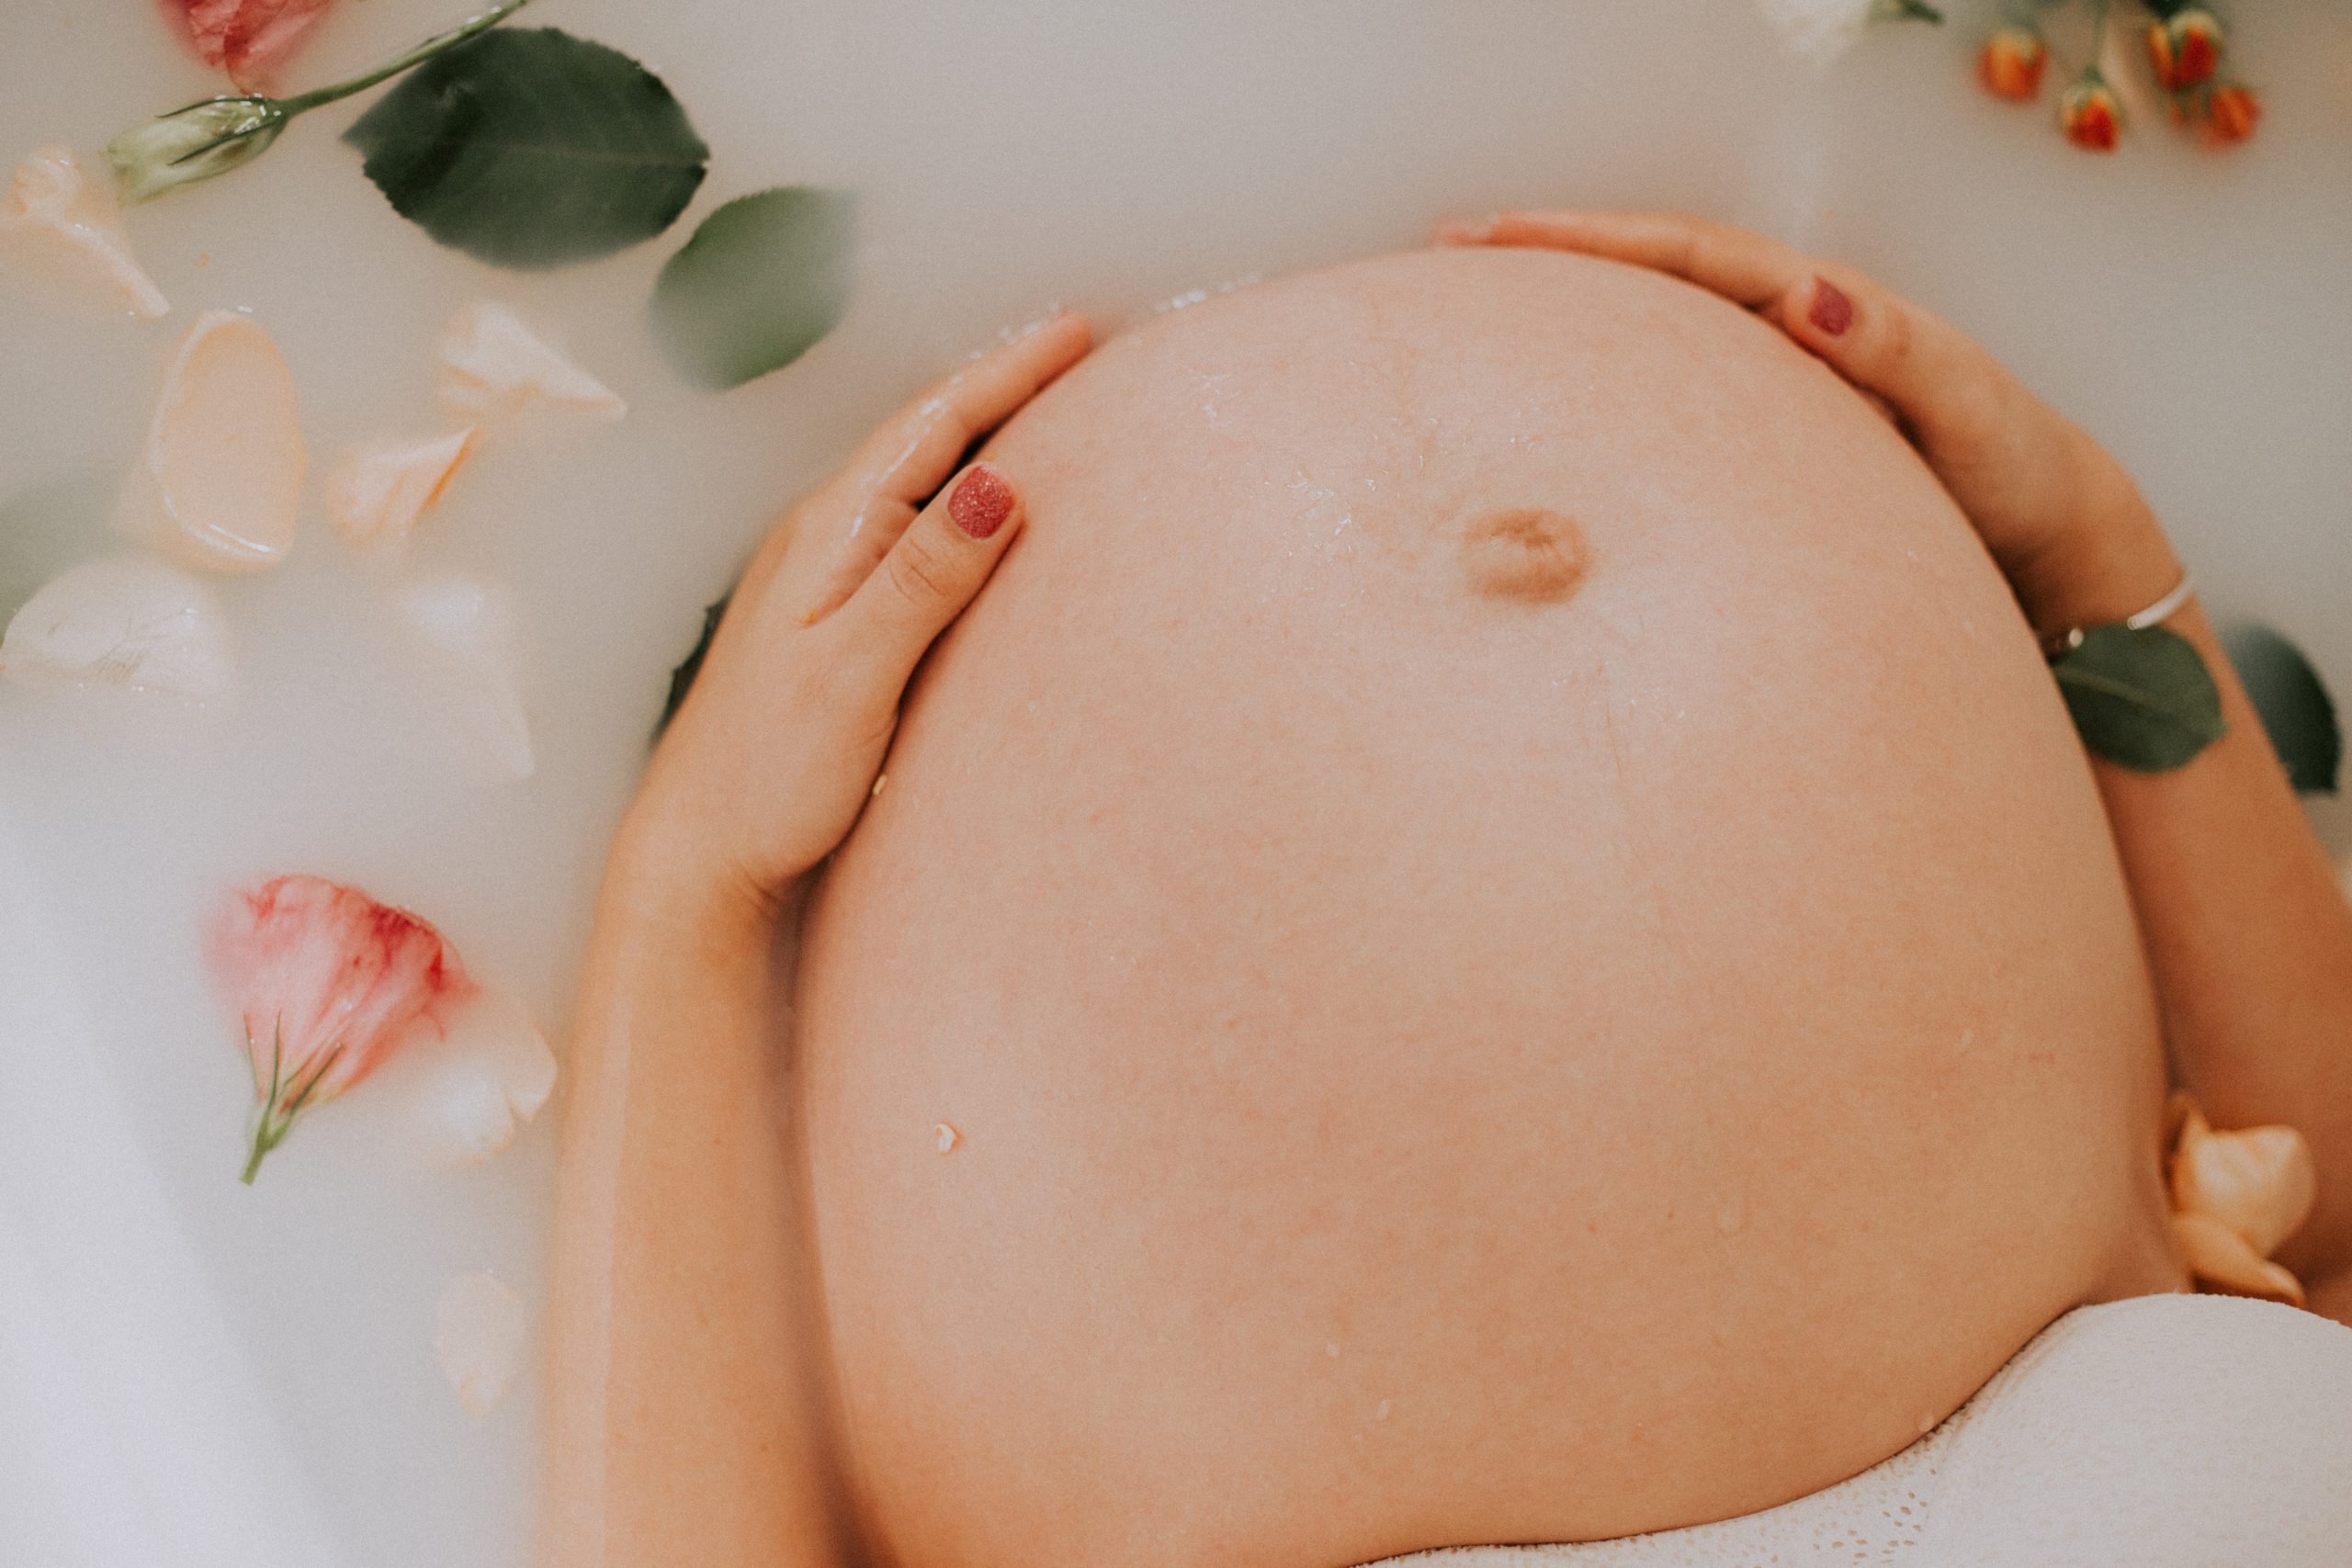 ‘Fourth Trimester’ recovery – a midwife explains what physical changes to expect